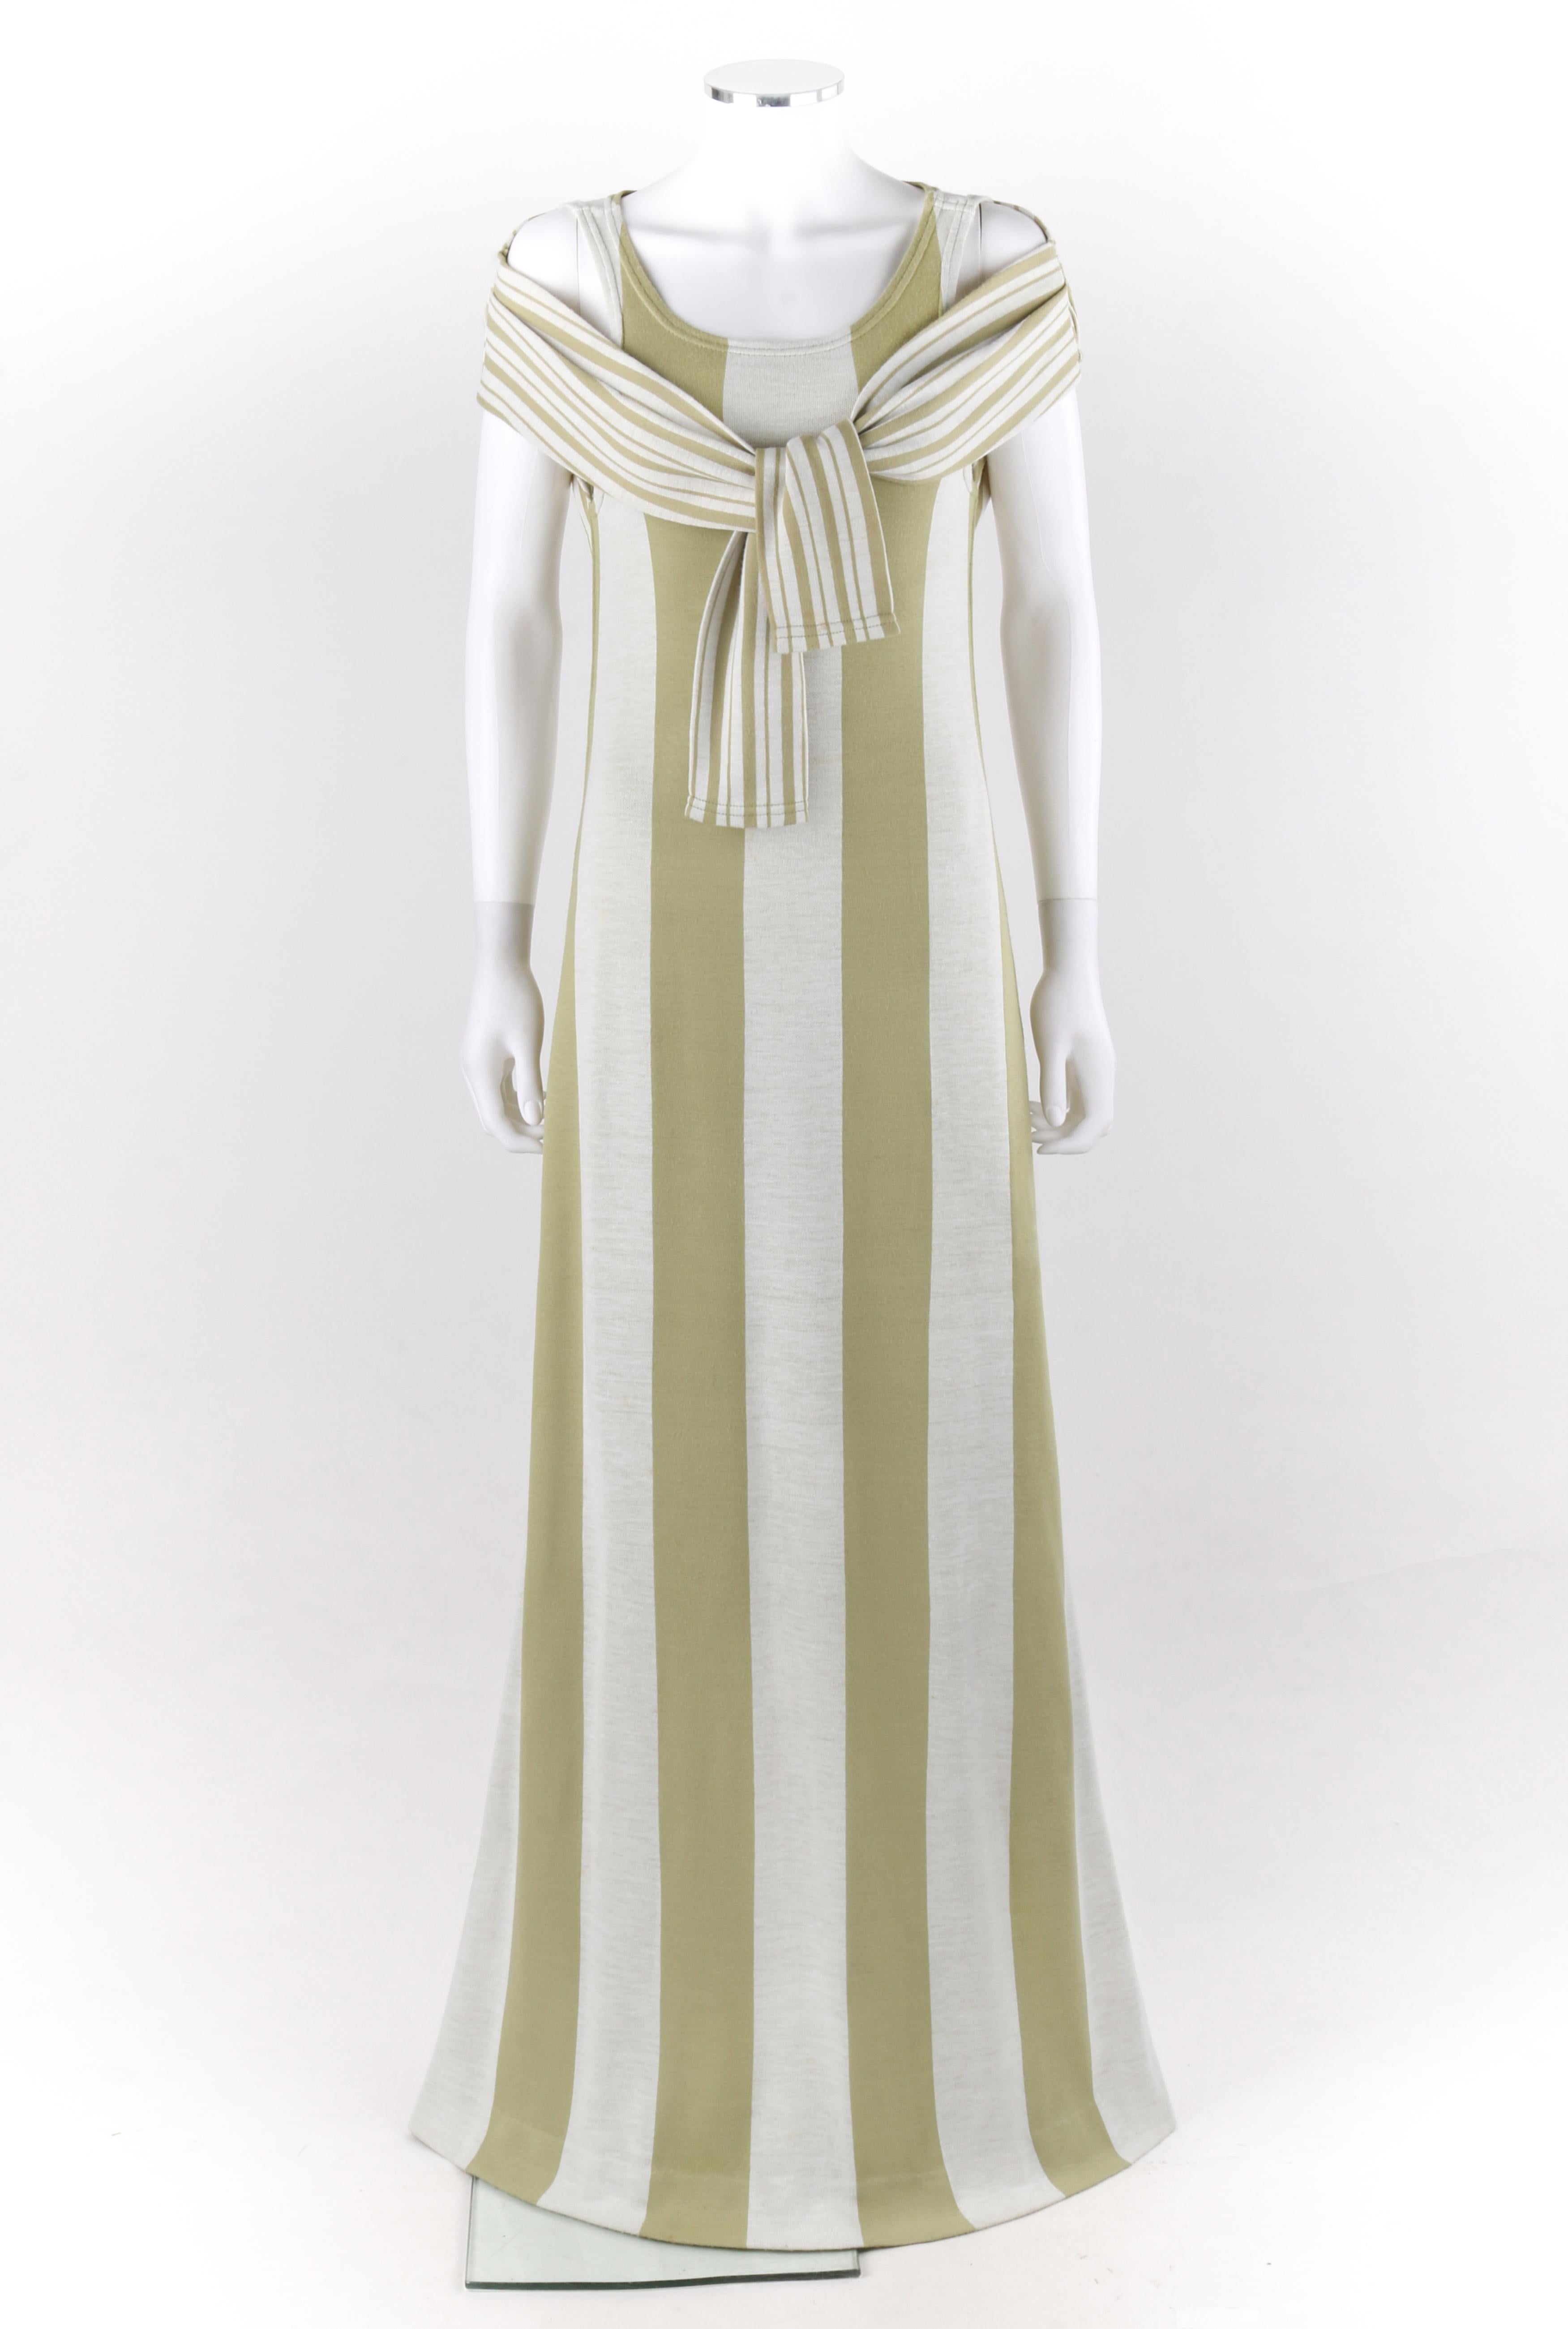 RUDI GERNREICH Harmon Knitwear c.1960’s Striped Trompe l' Oeil Wool Dress Shawl
 
Circa: 1960’s 
Label(s): Rudi Gernreich design for Harmon Knitwear 
Style: Maxi dress and shawl
Color(s): Shades of green and white
Lined: No
Marked Fabric Content: